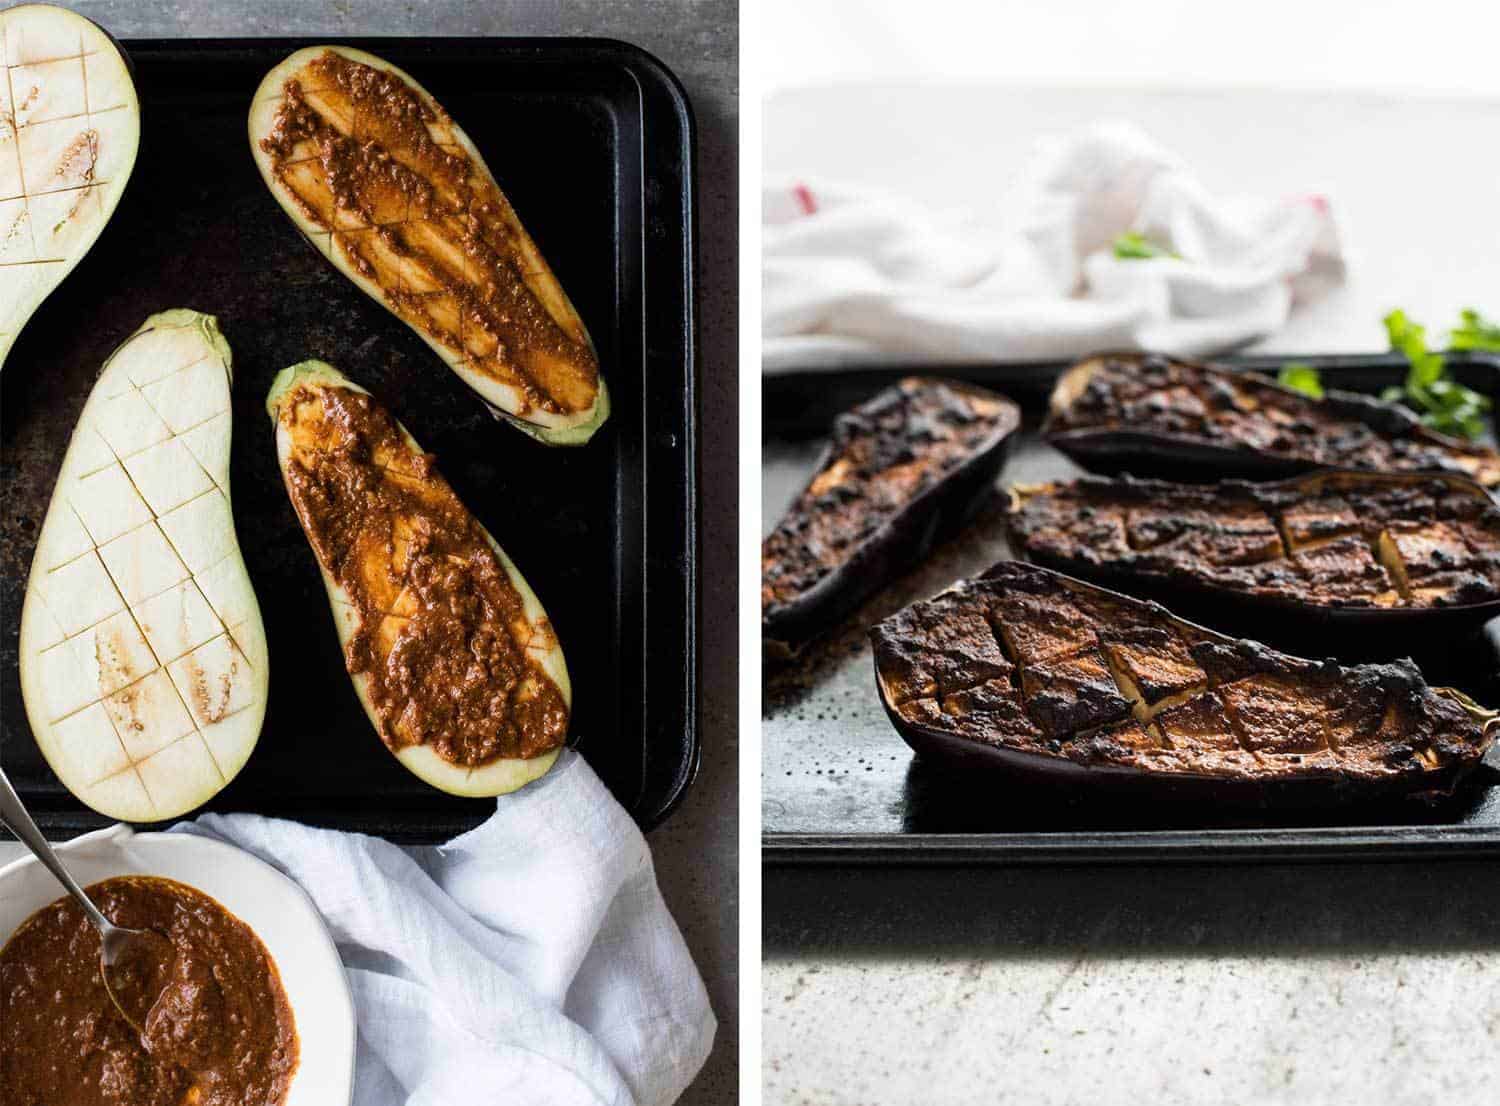 Moroccan Baked Eggplant with Beef smeared with chermoula before baking, and result after baking